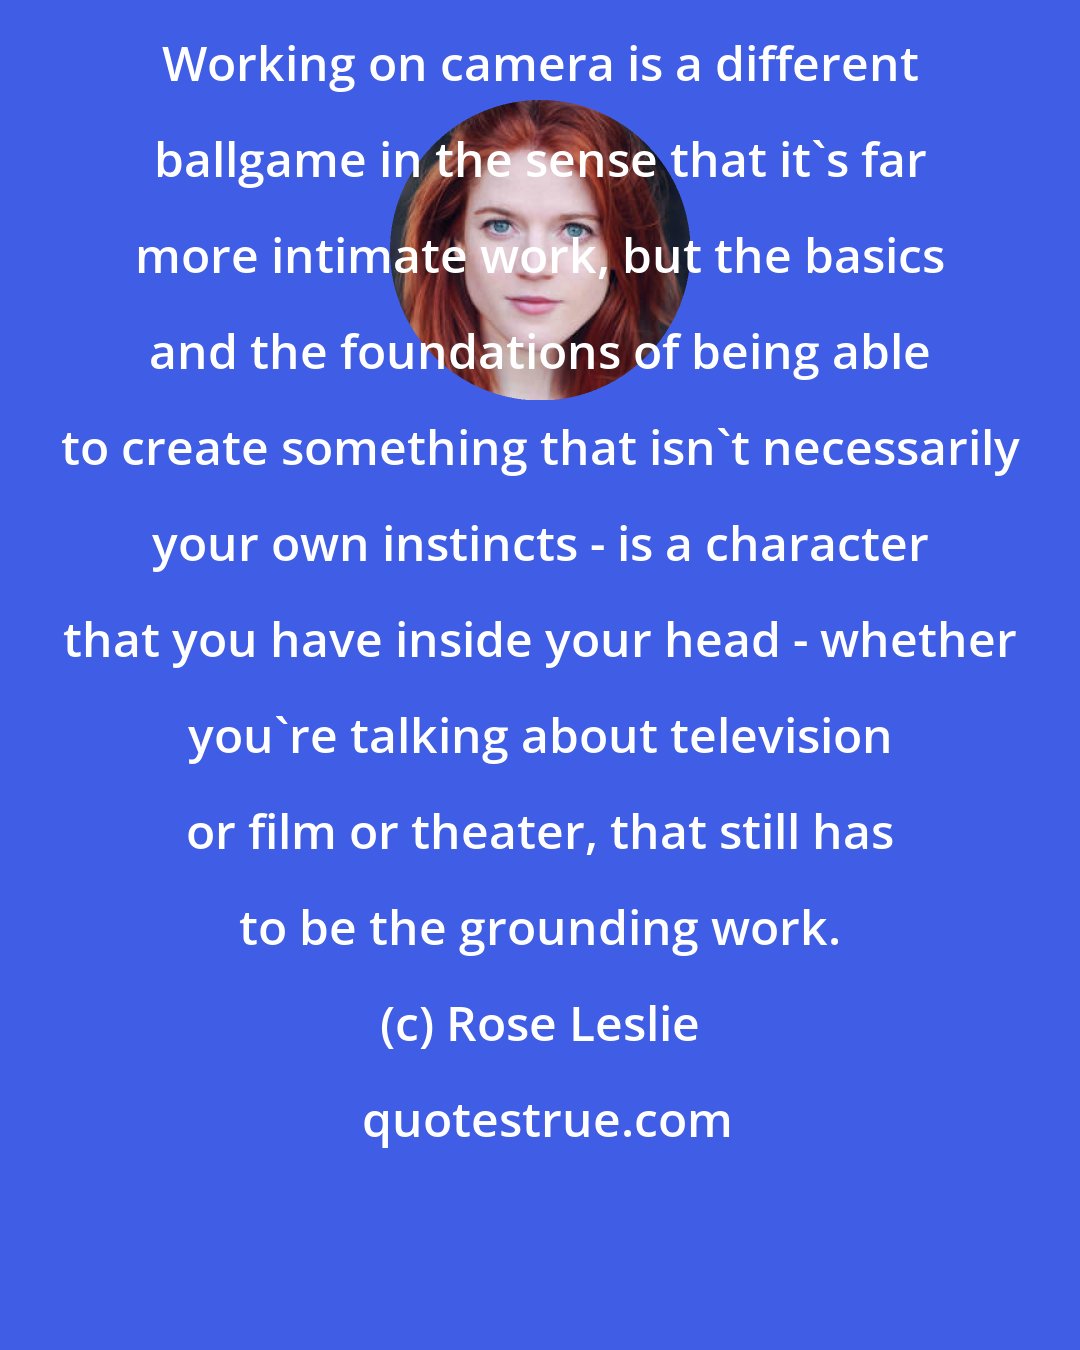 Rose Leslie: Working on camera is a different ballgame in the sense that it's far more intimate work, but the basics and the foundations of being able to create something that isn't necessarily your own instincts - is a character that you have inside your head - whether you're talking about television or film or theater, that still has to be the grounding work.